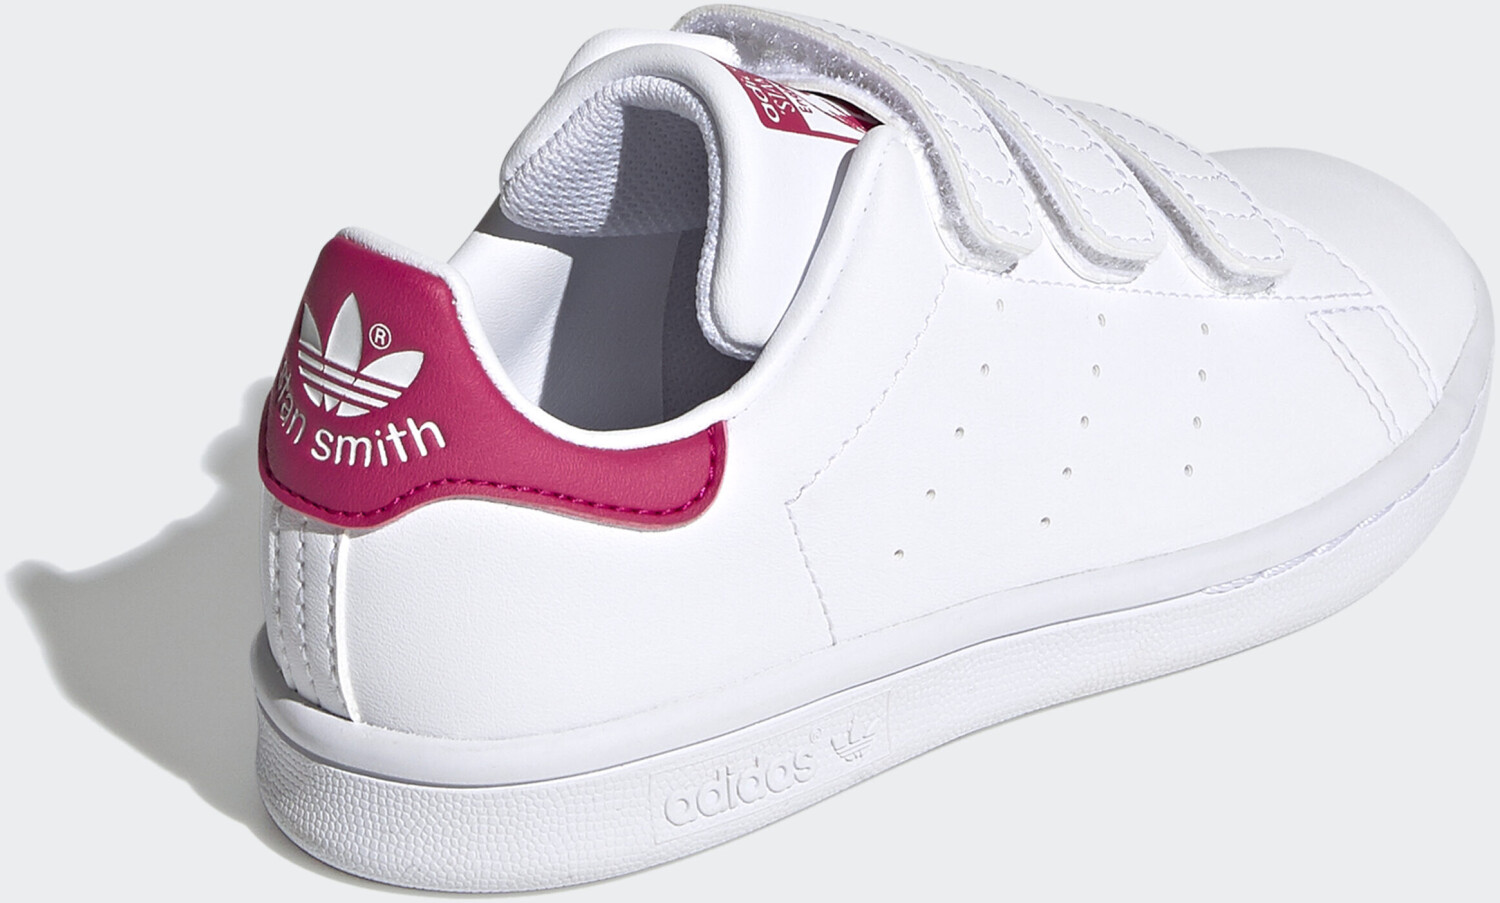 Buy Adidas Stan Smith Cloud White/Cloud White/Bold Pink Kinder from £32.50  (Today) – Best Deals on